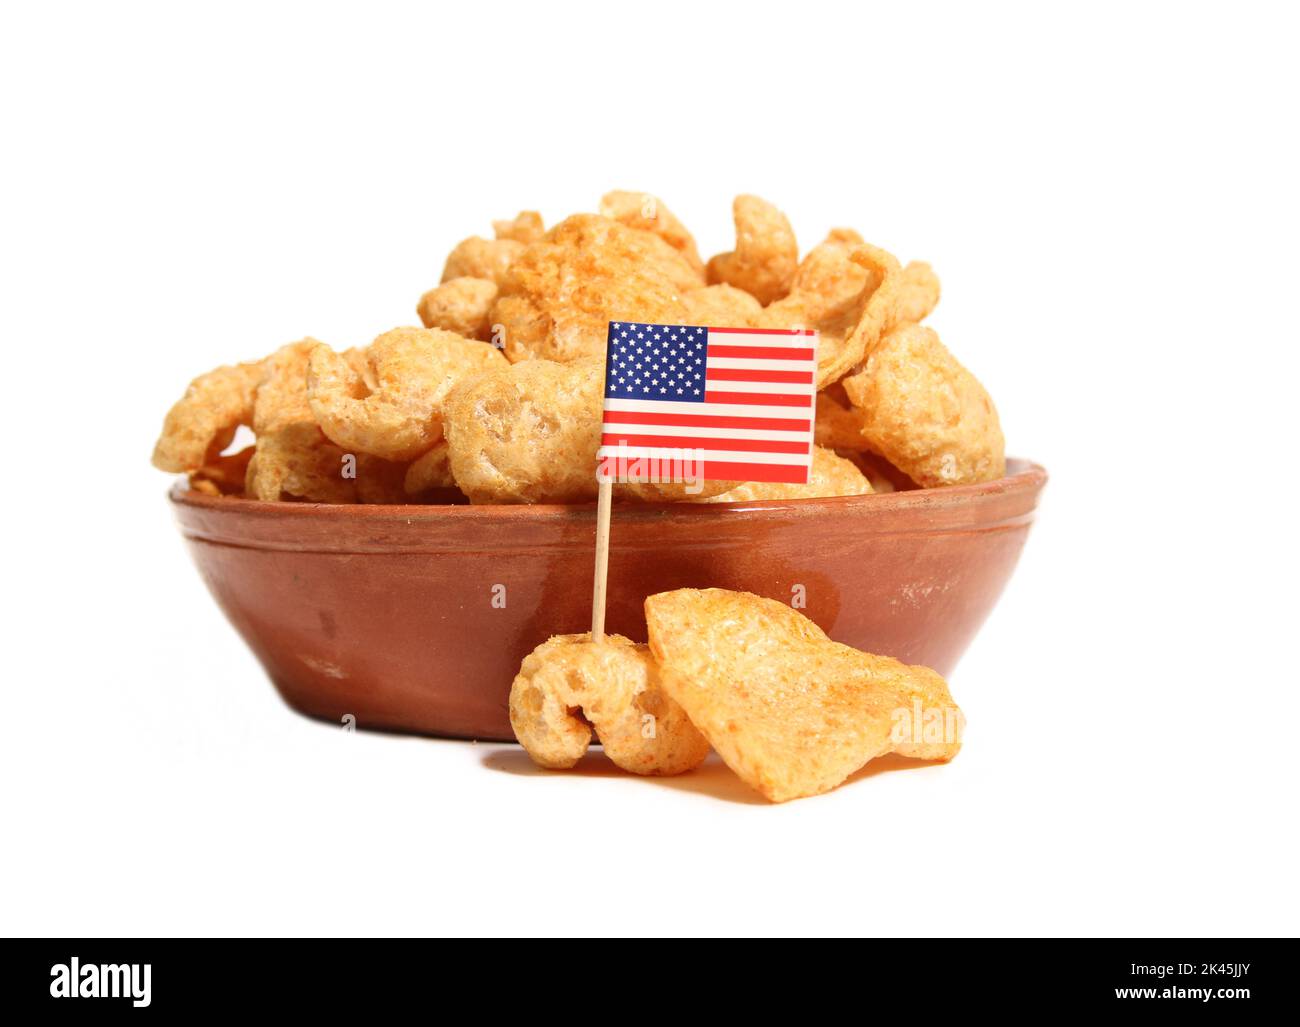 Pile of Fried Pork Skins Isolated on White background With Flag of ...